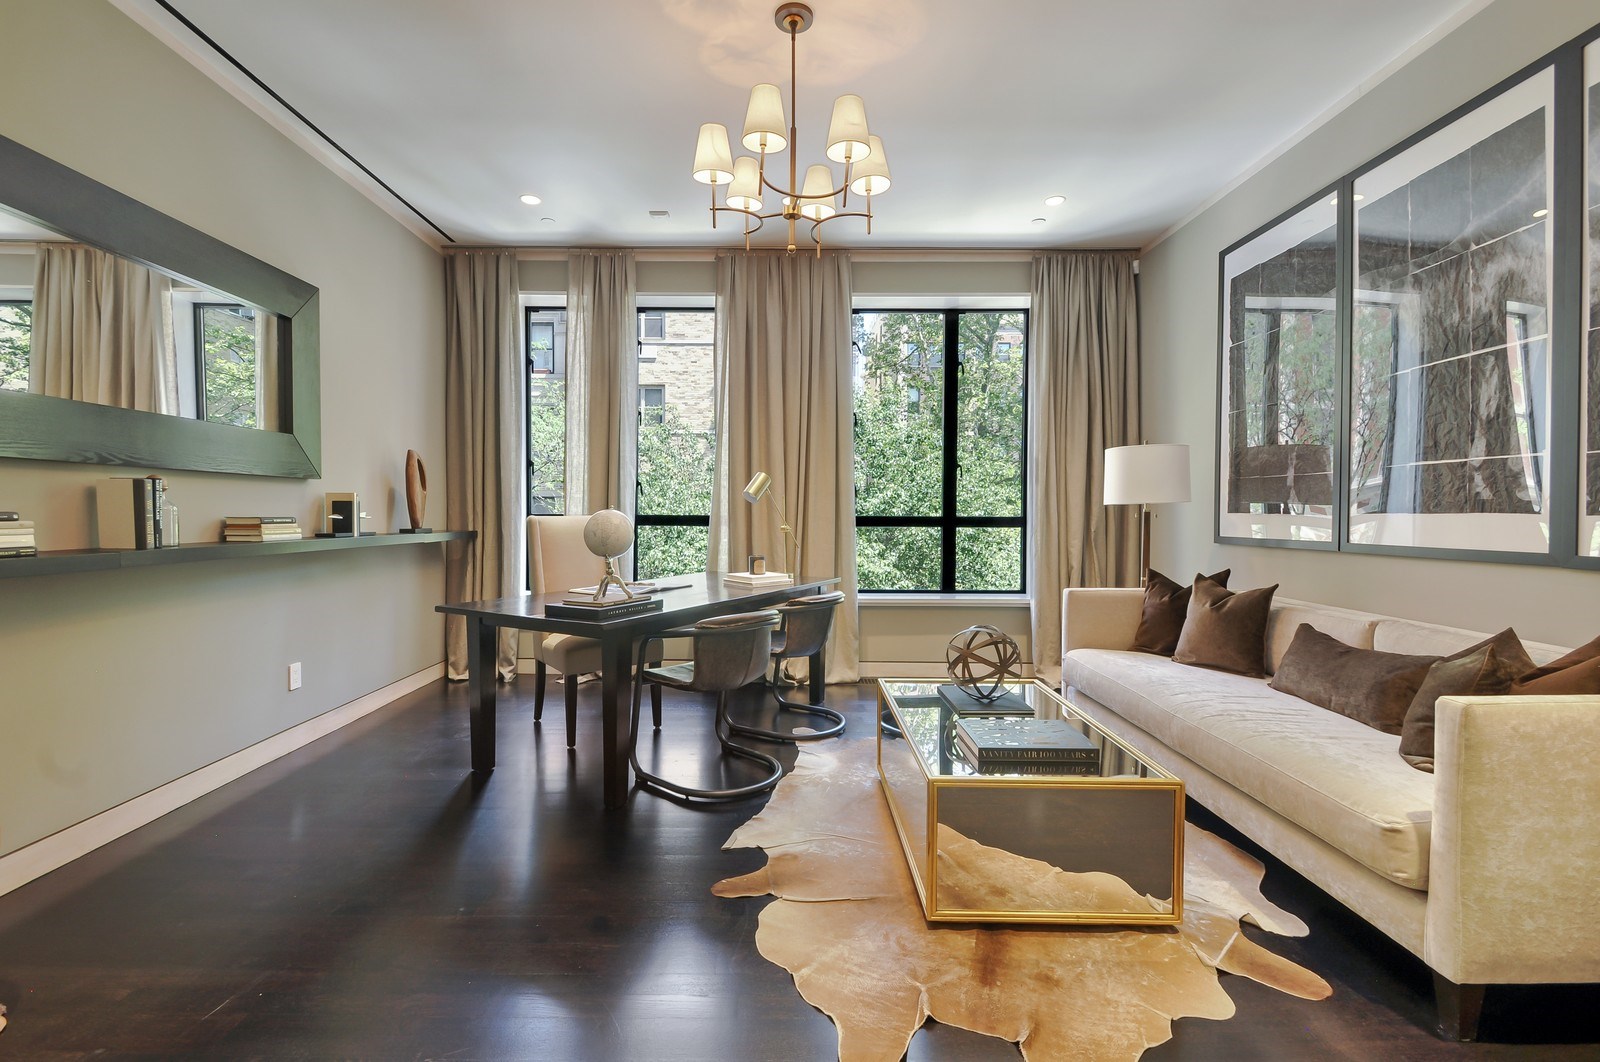 46 EAST 83RD STREET | Charles Diehl Architect | Architect in Brooklyn, NY